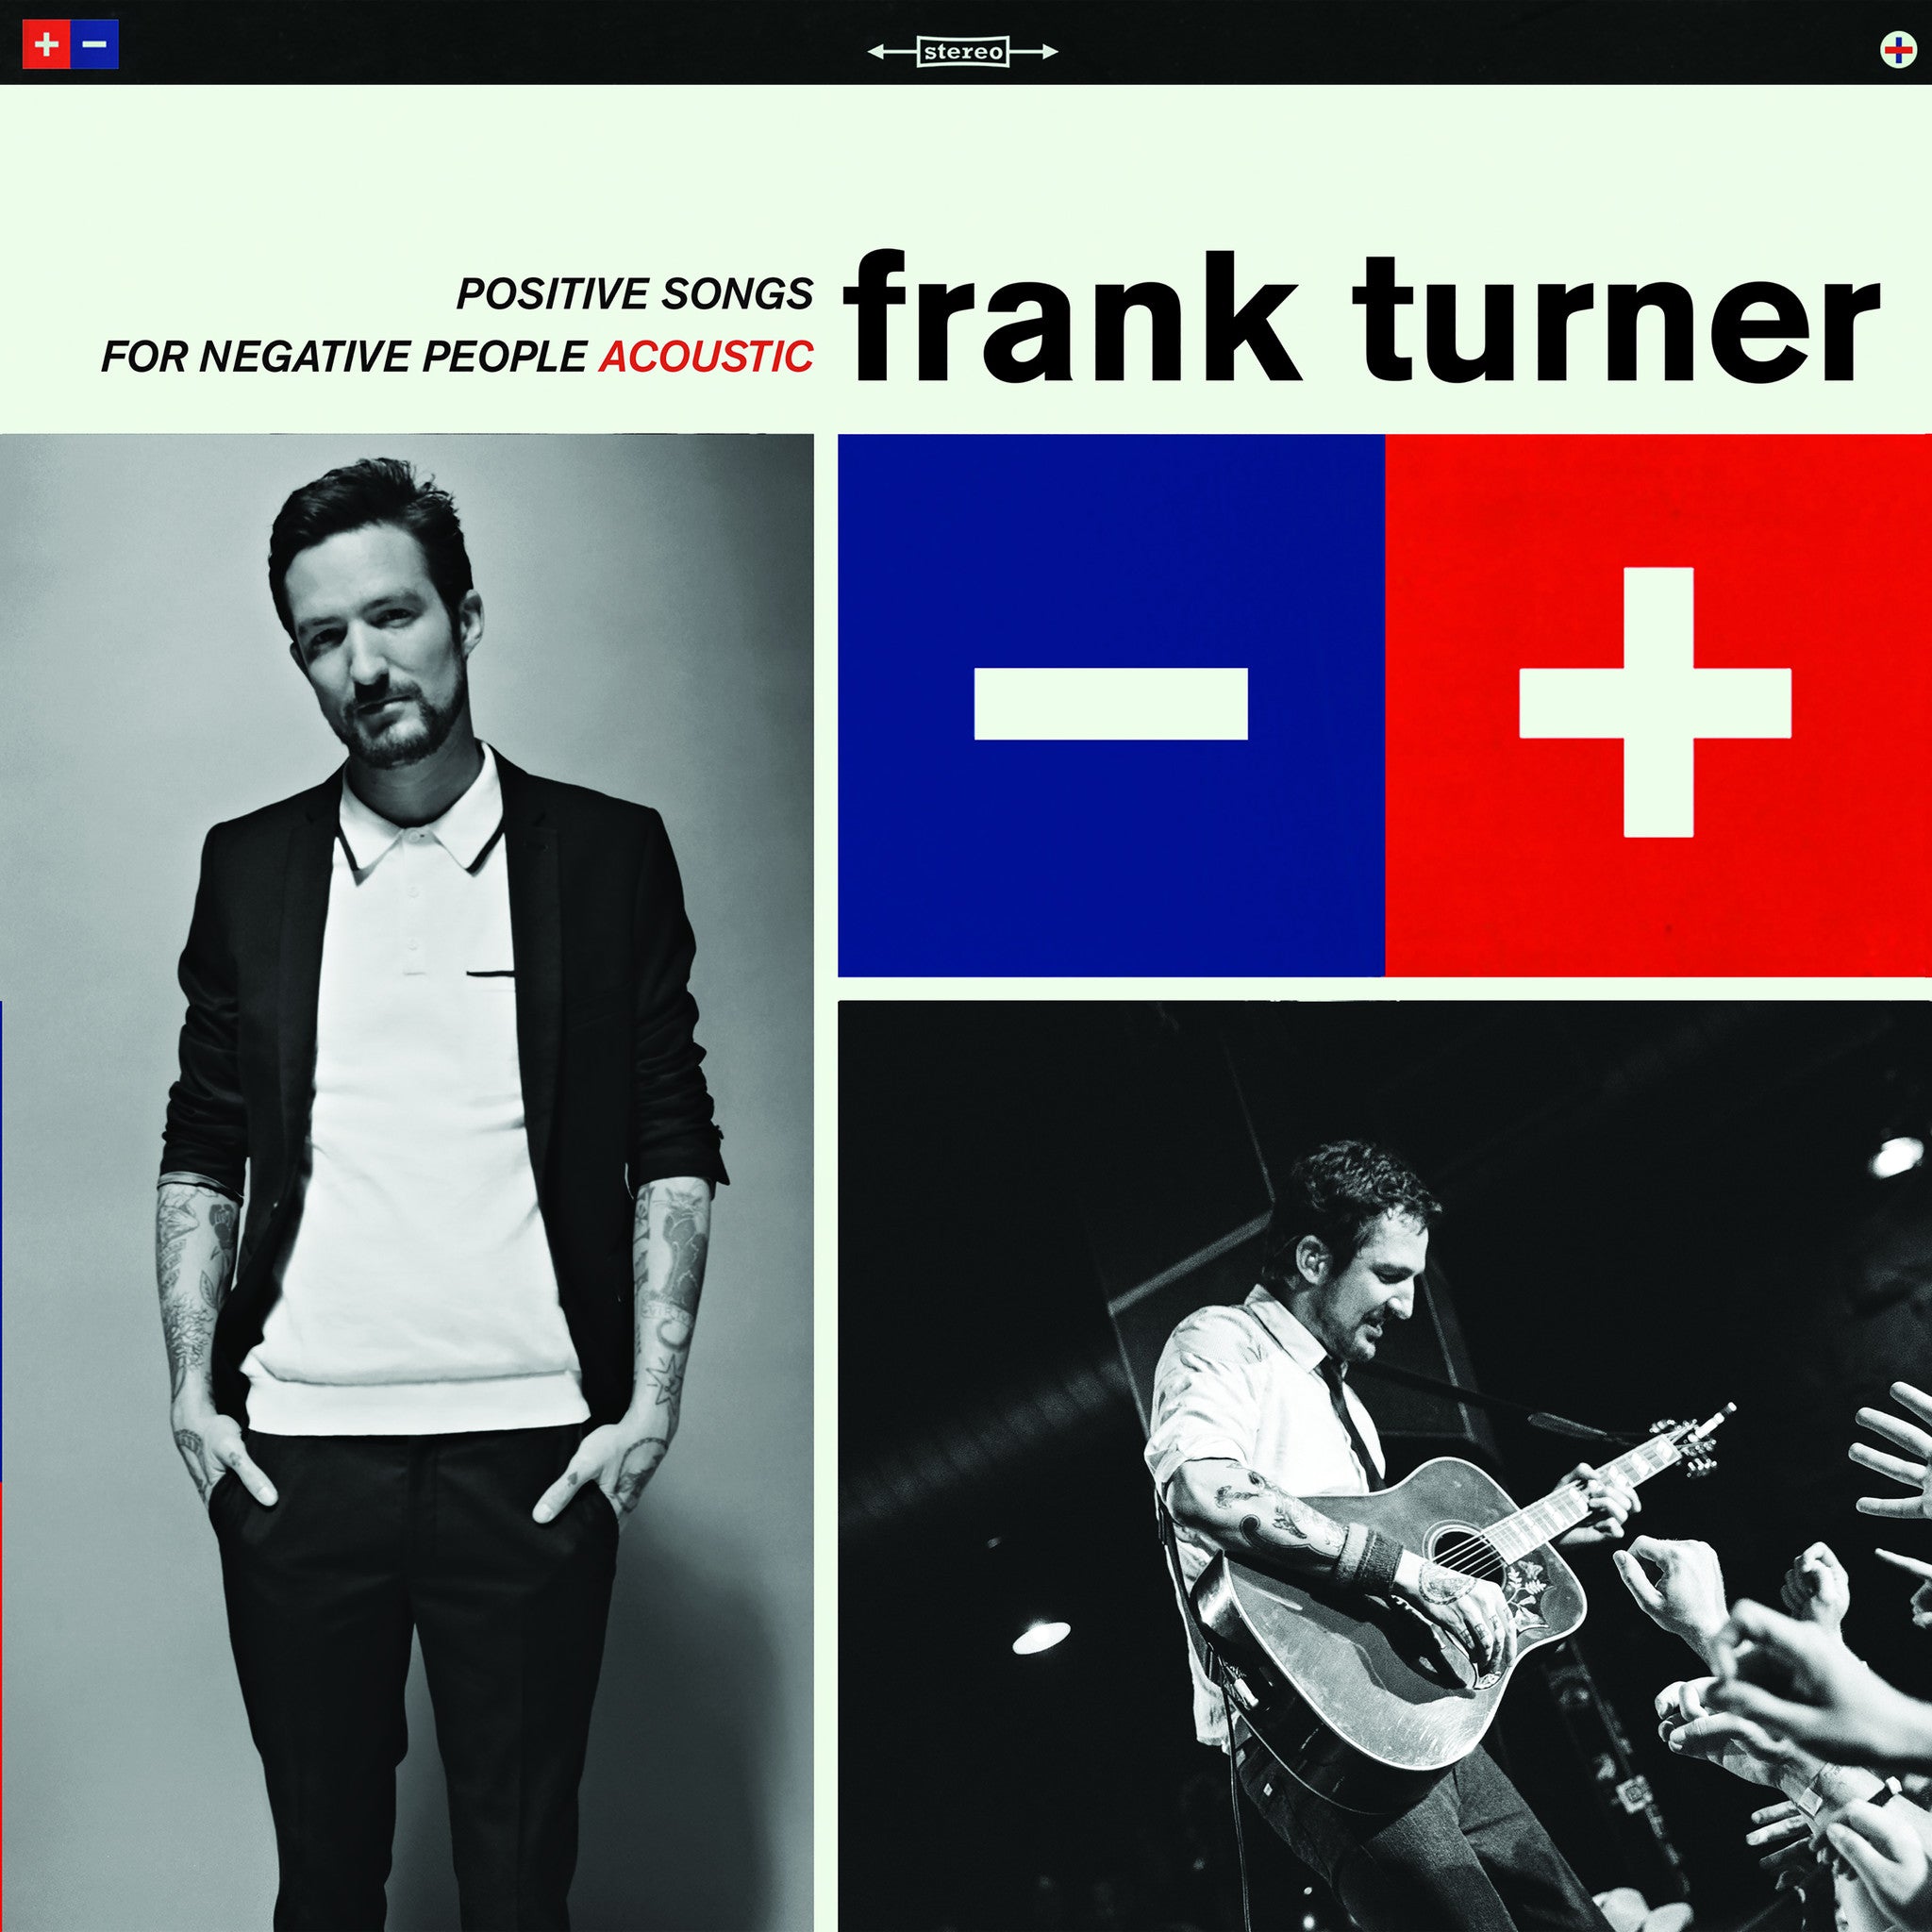 Frank Turner - Positive Songs for Negative People (Acoustic) - New Vinyl Record 2016 Interscope Record Store Day 140 Gram Vinyl, Limited to 3000